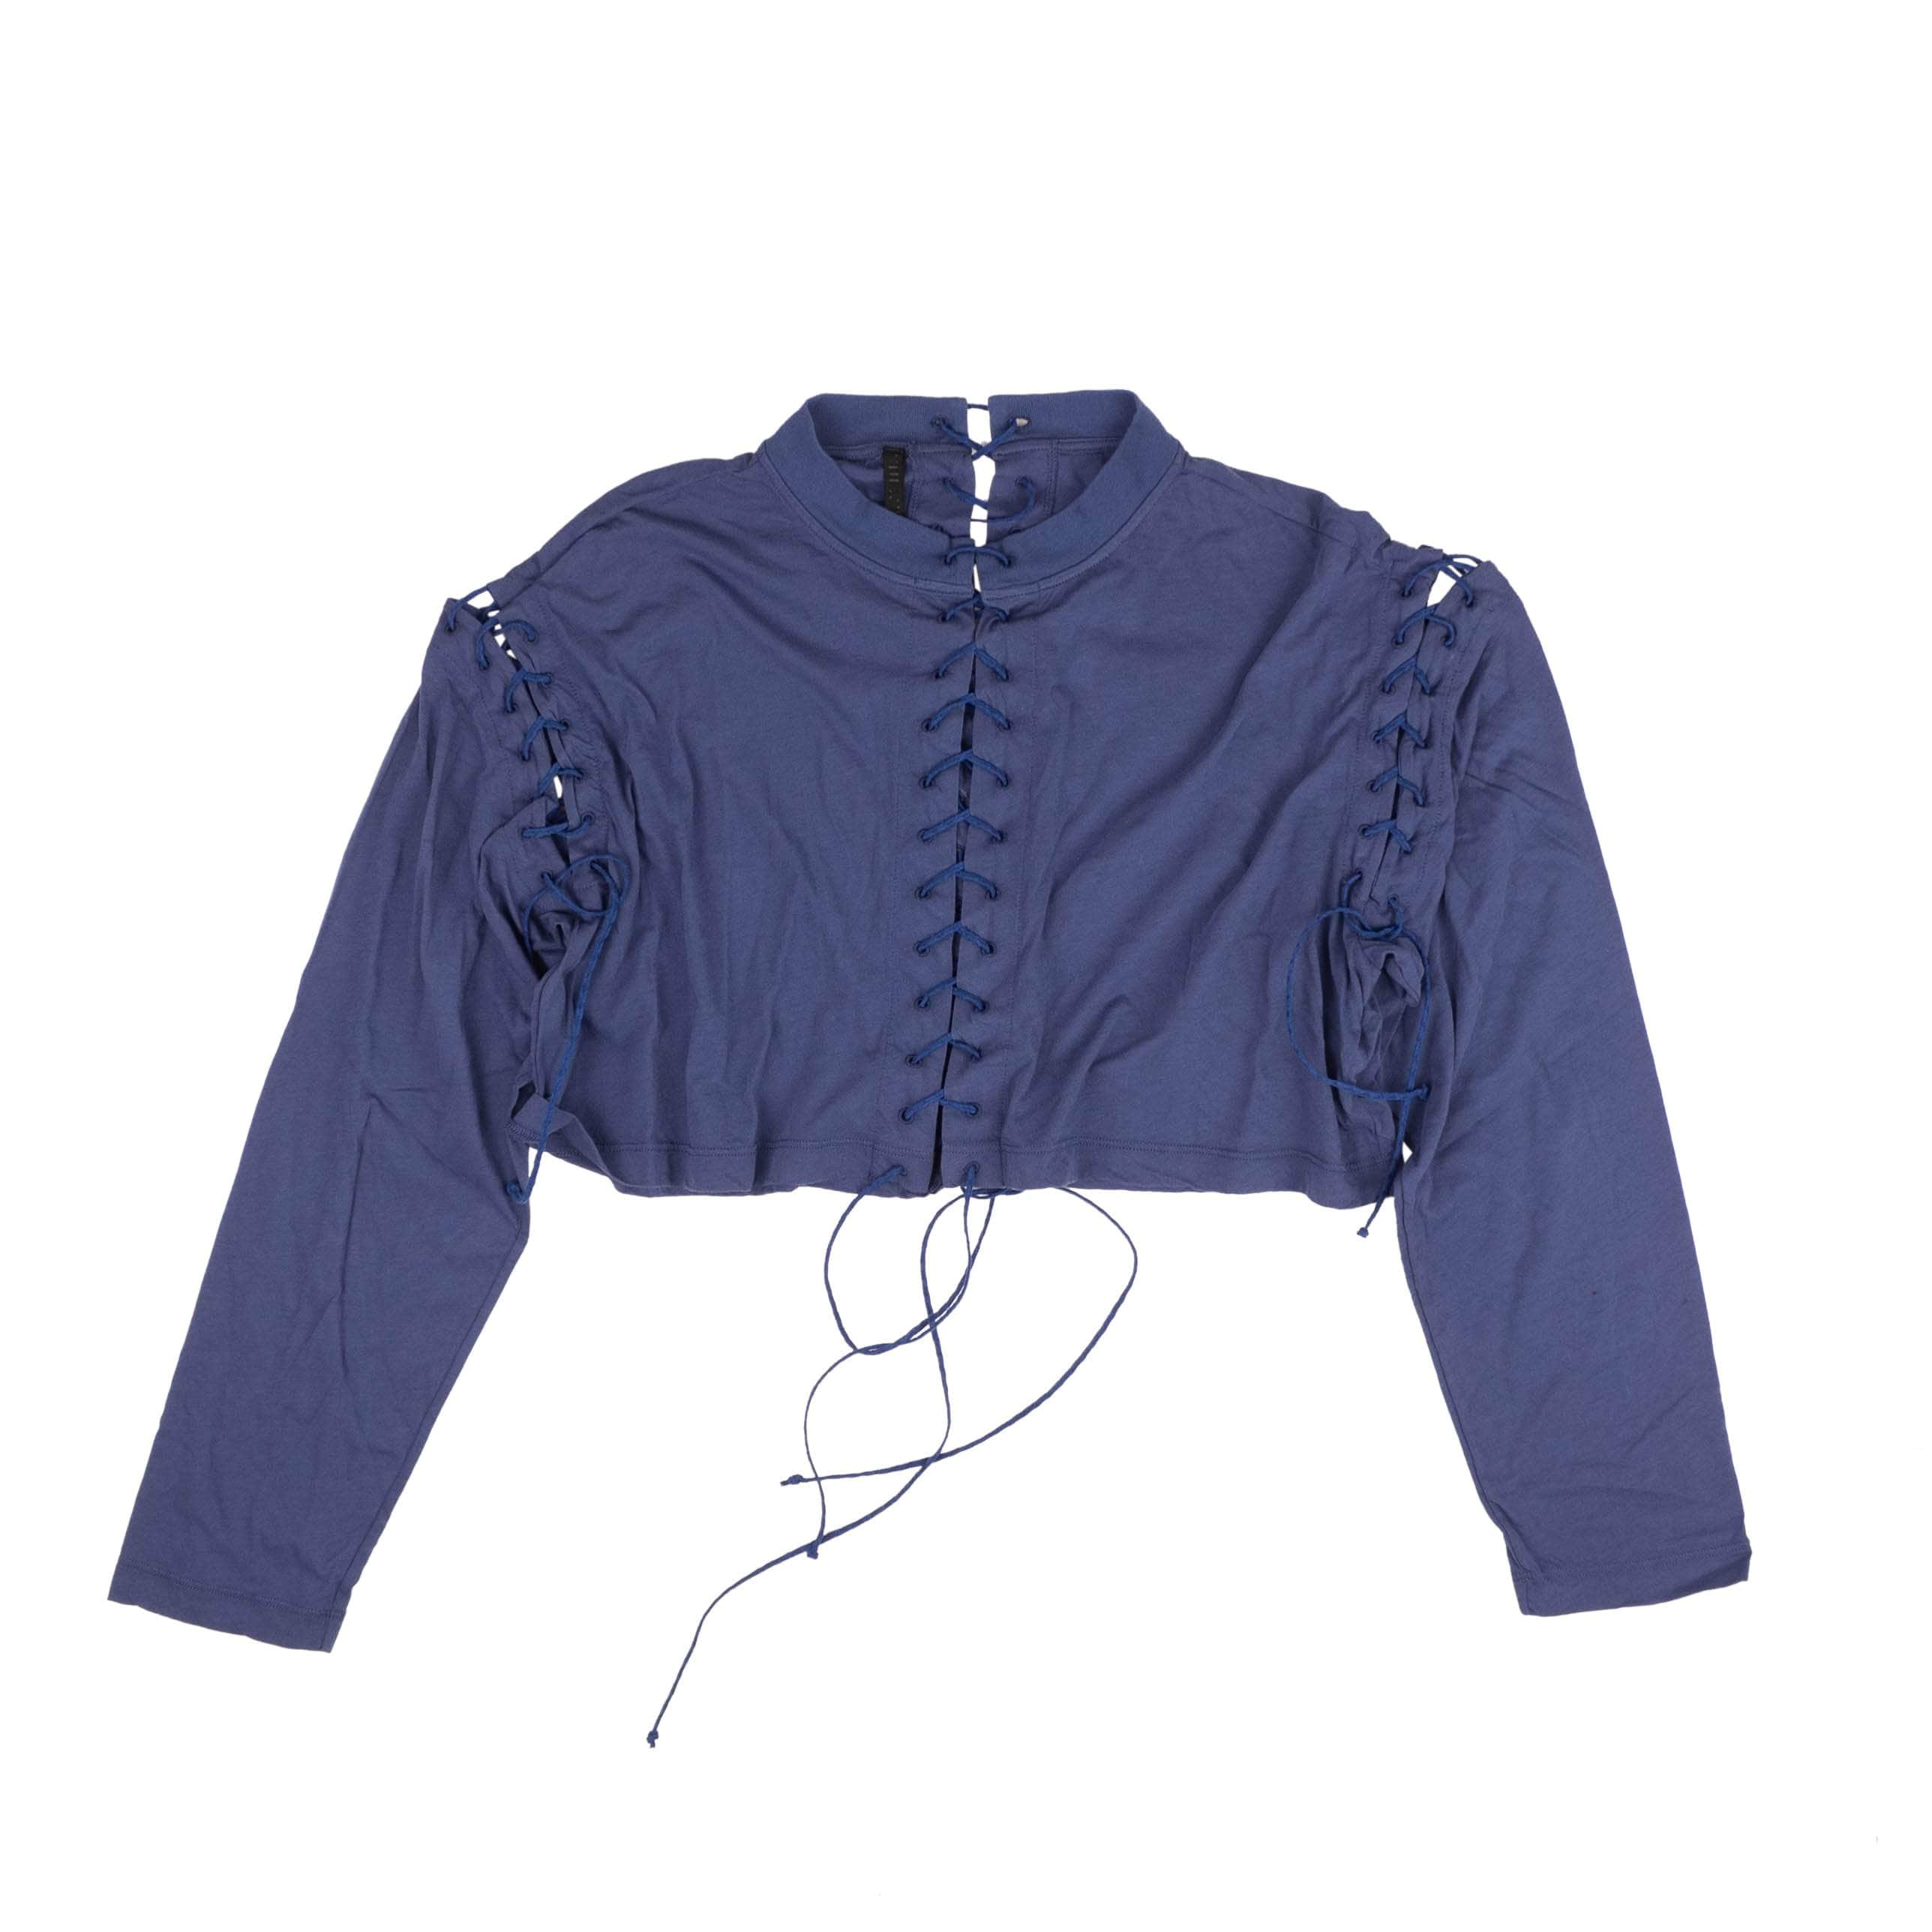 Unravel Project channelenable-all, chicmi, couponcollection, gender-womens, main-clothing, size-s, under-250, unravel-project S Blue Cropped Lace Up Long Sleeve T-Shirt 74NGG-UN-1079/S 74NGG-UN-1079/S